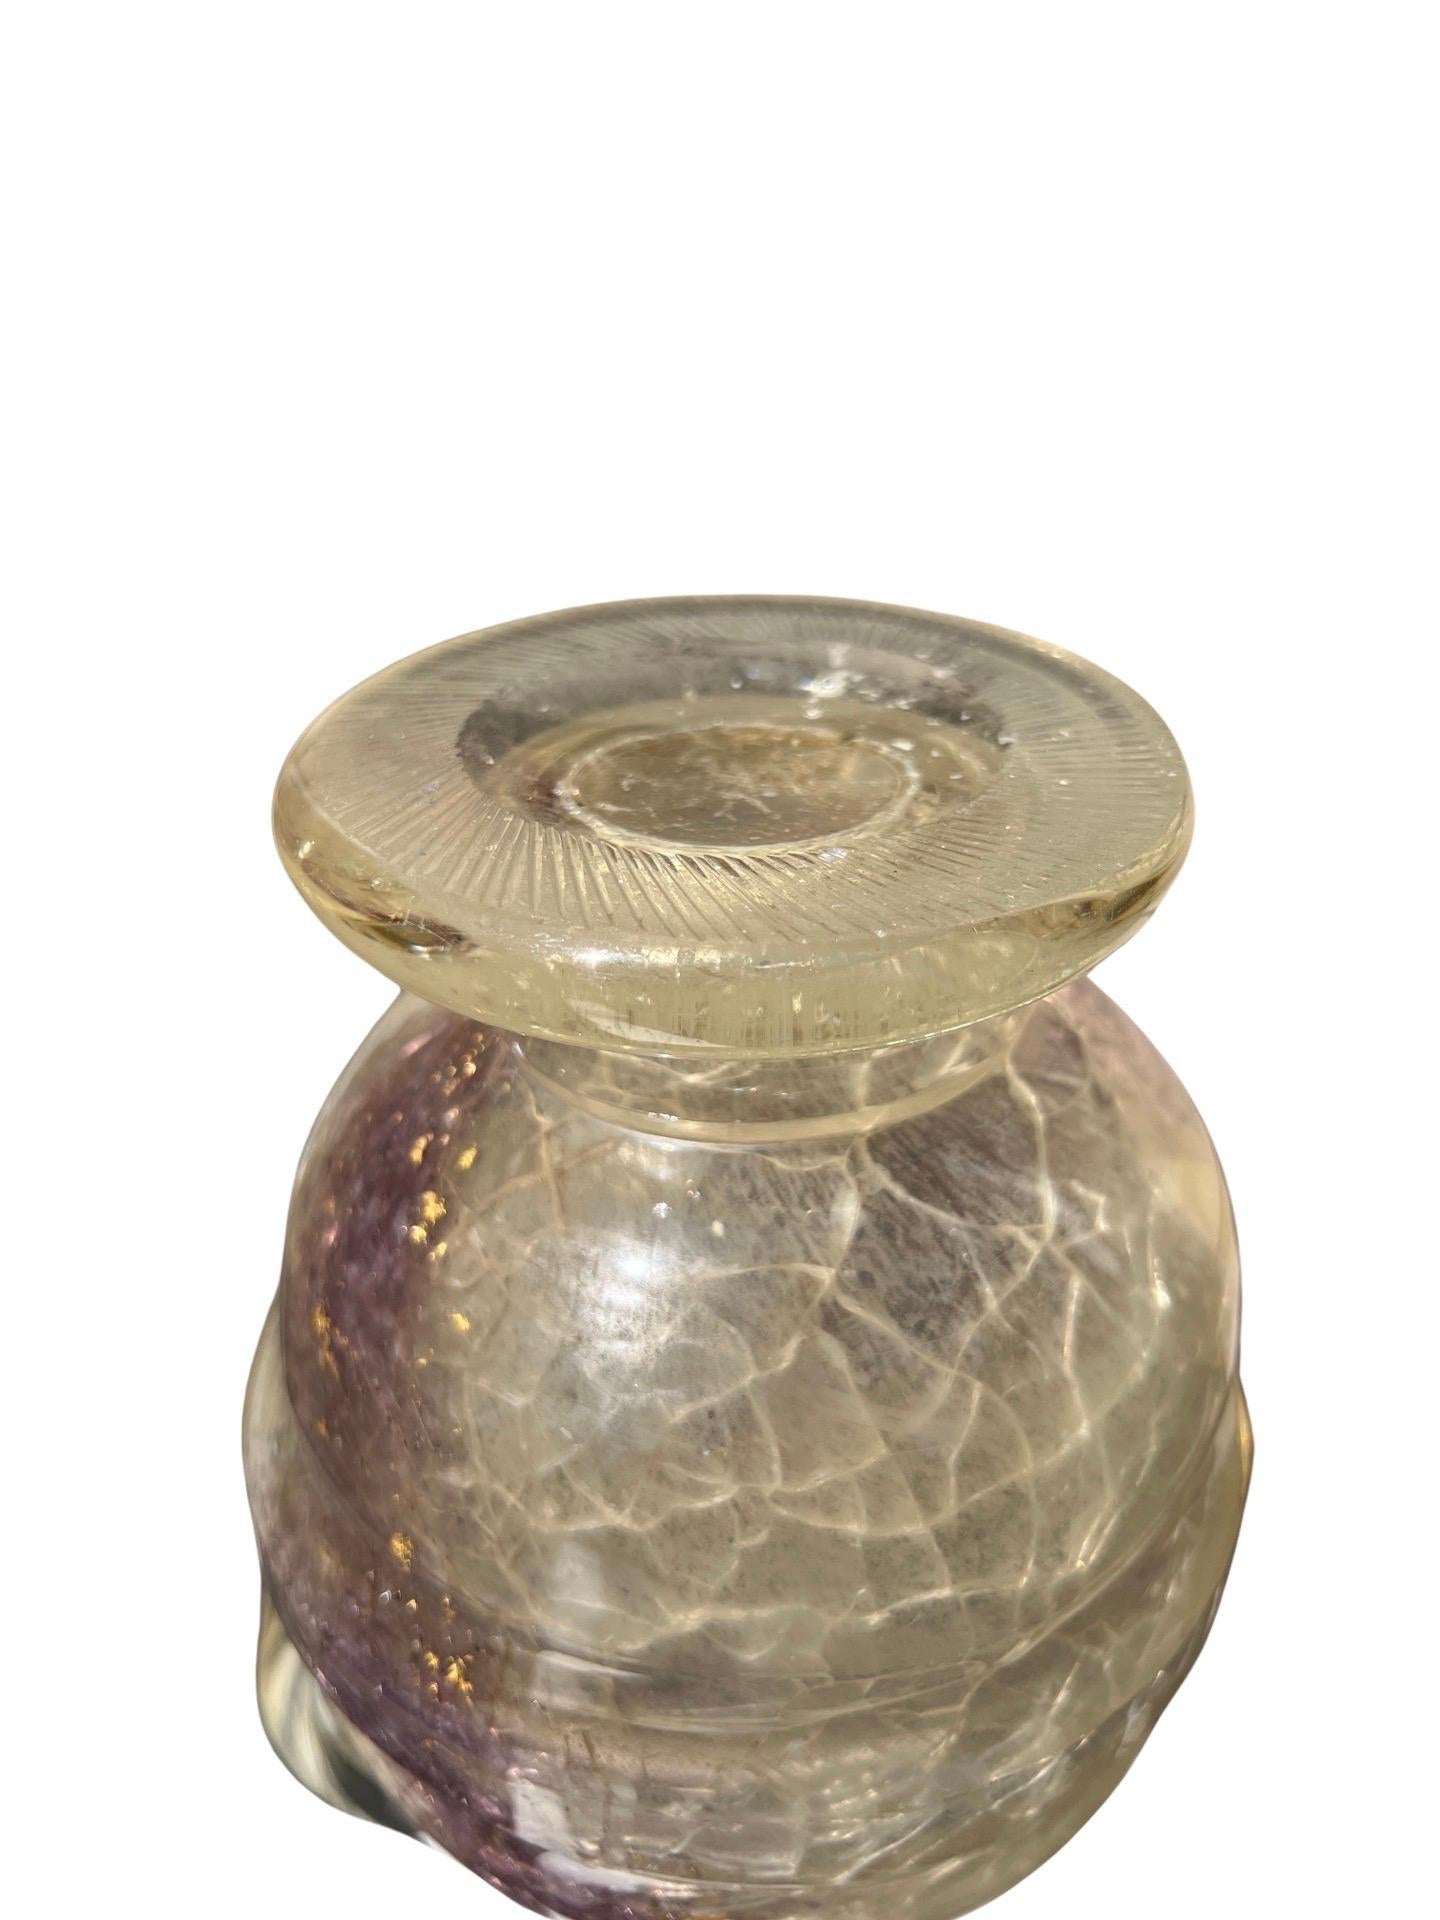 After The Roman Antique - Rock Crystal, Glass & Gold Flecking Grand Tour Pitcher For Sale 12